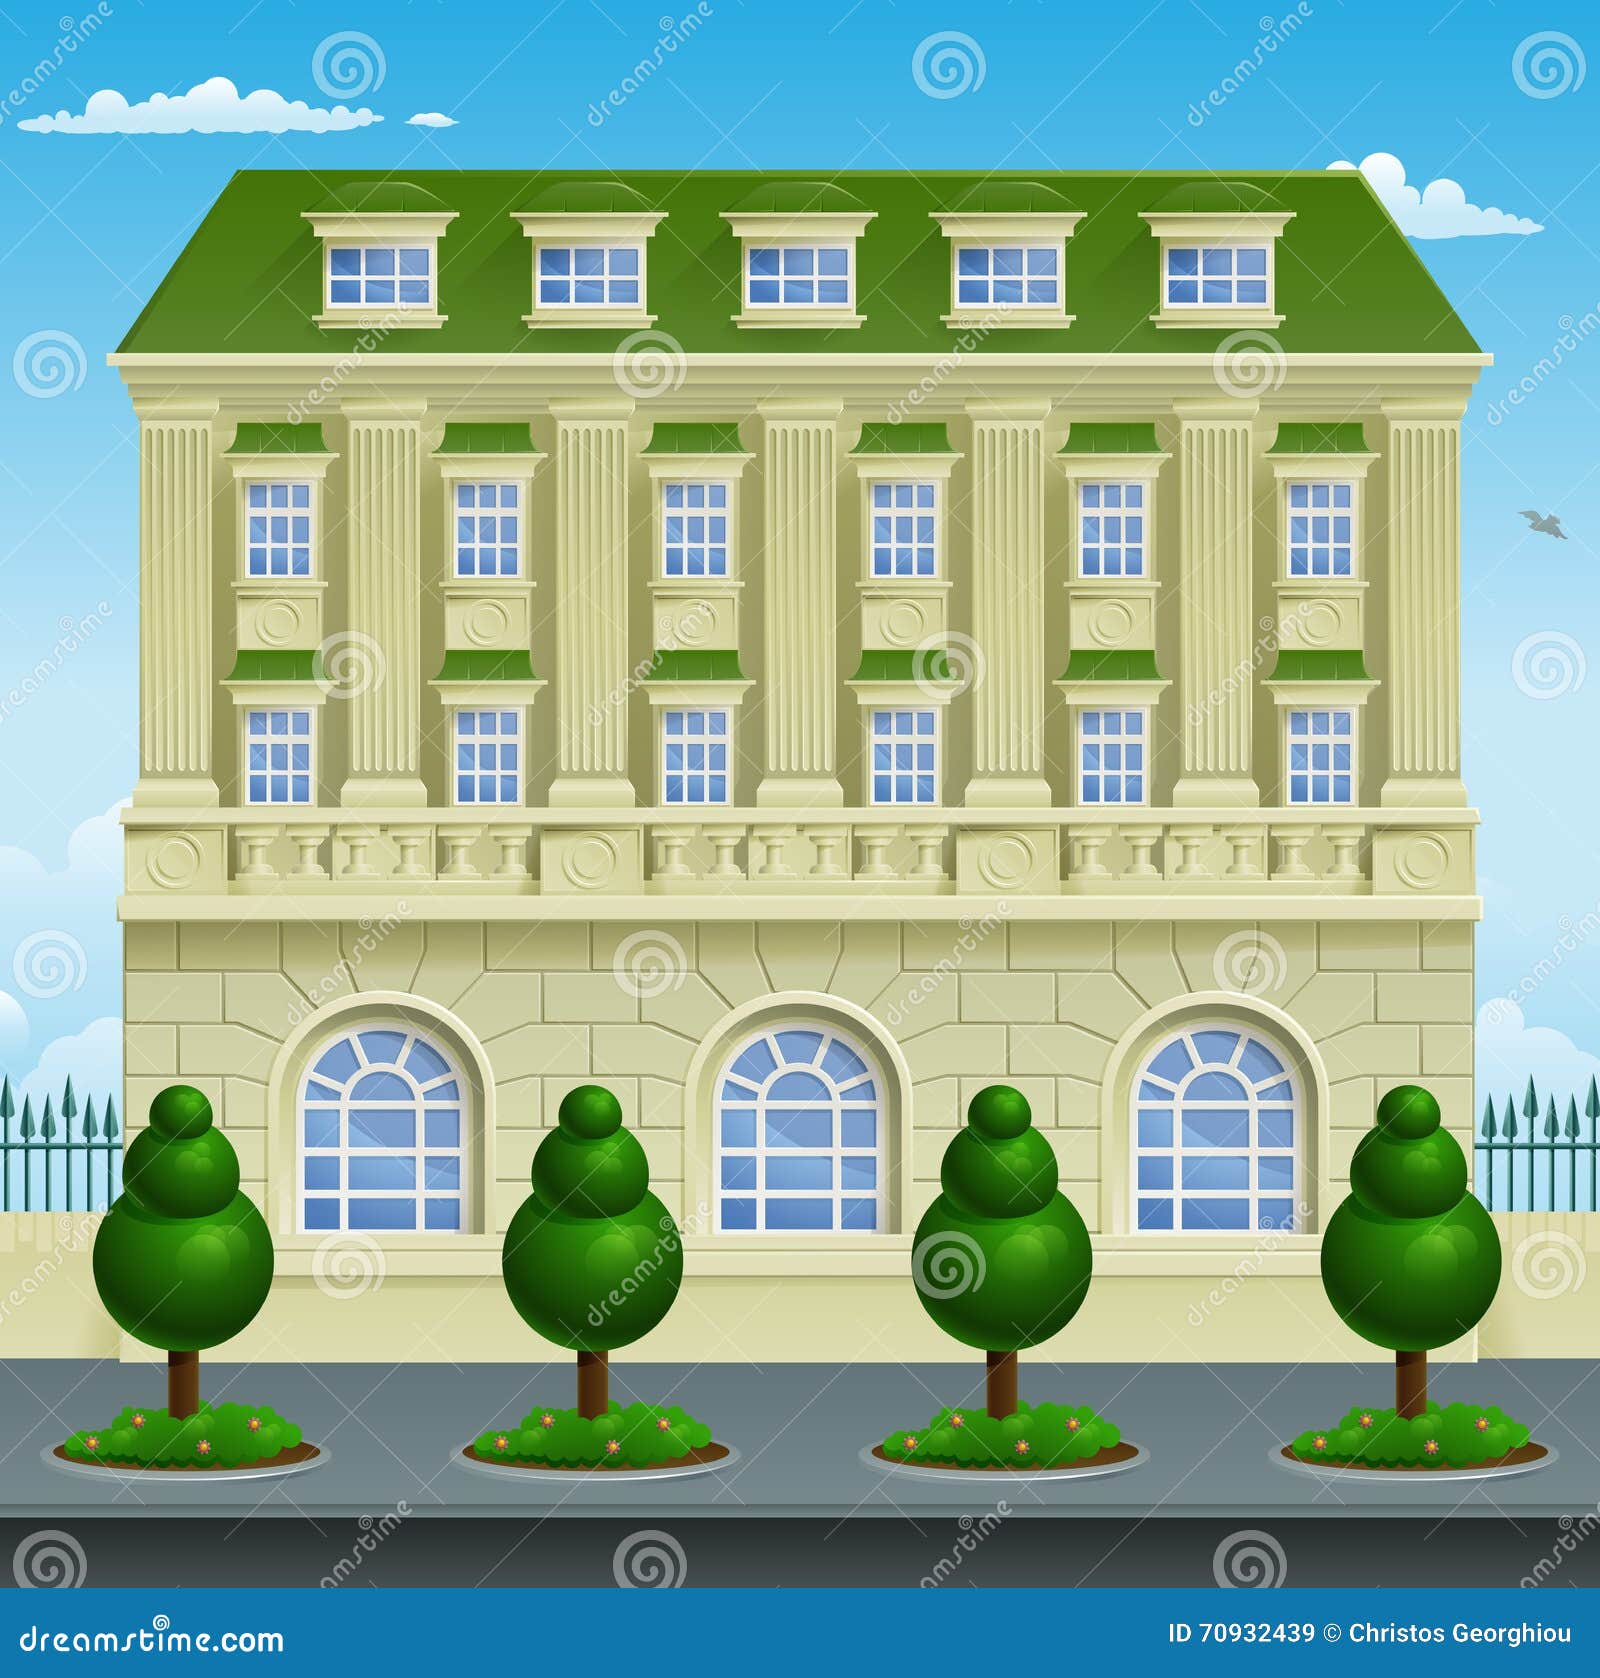 clipart mansion house - photo #29